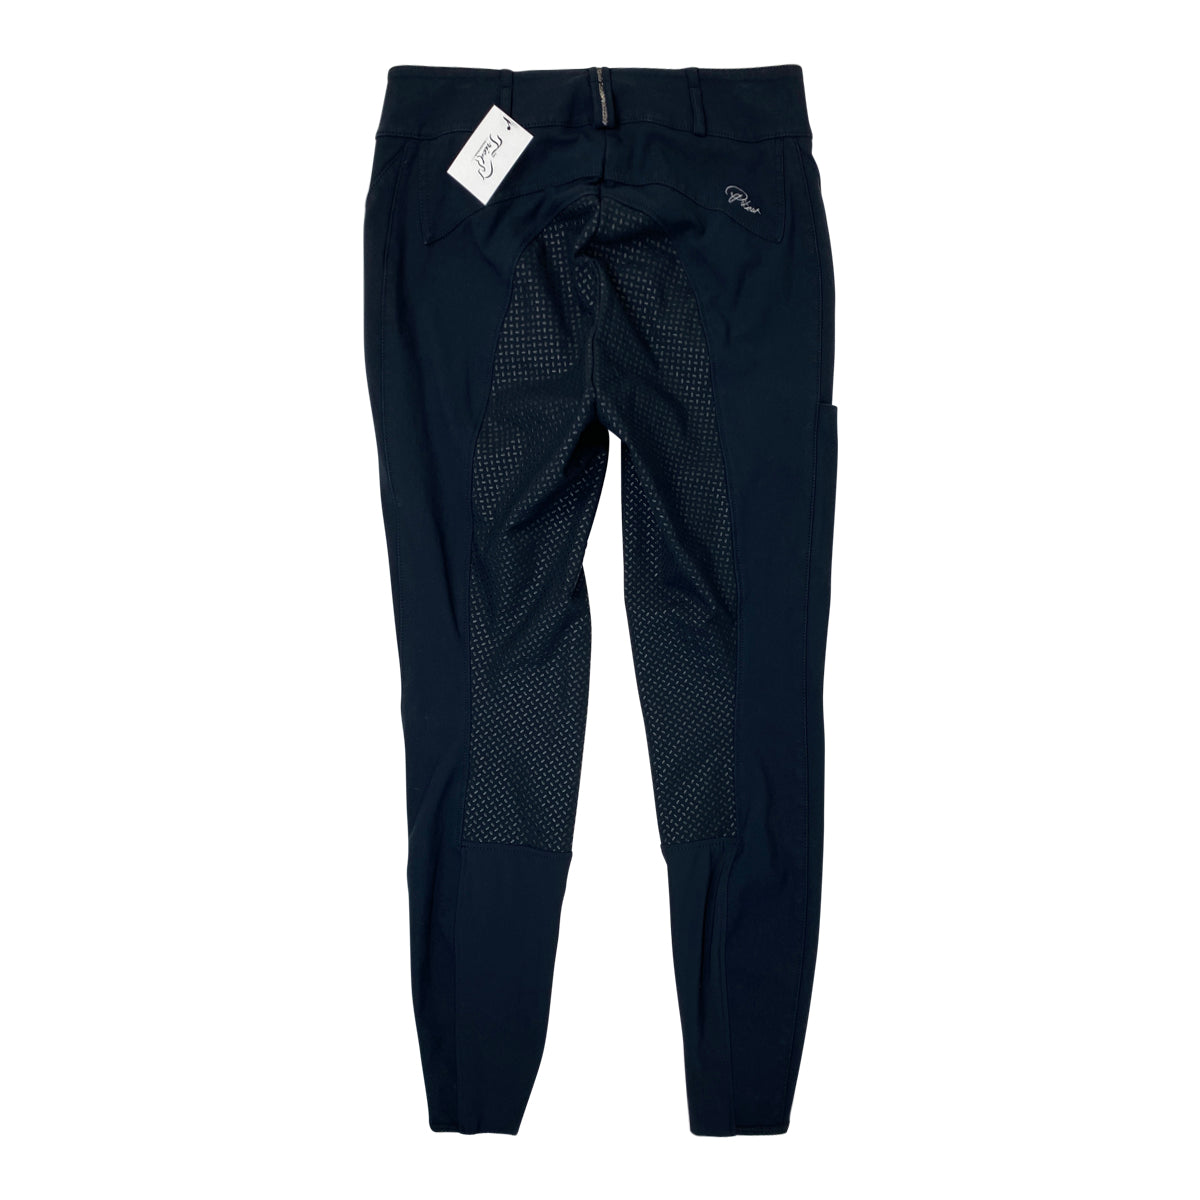 Pikeur 'Candela Glamour' Breeches in Navy